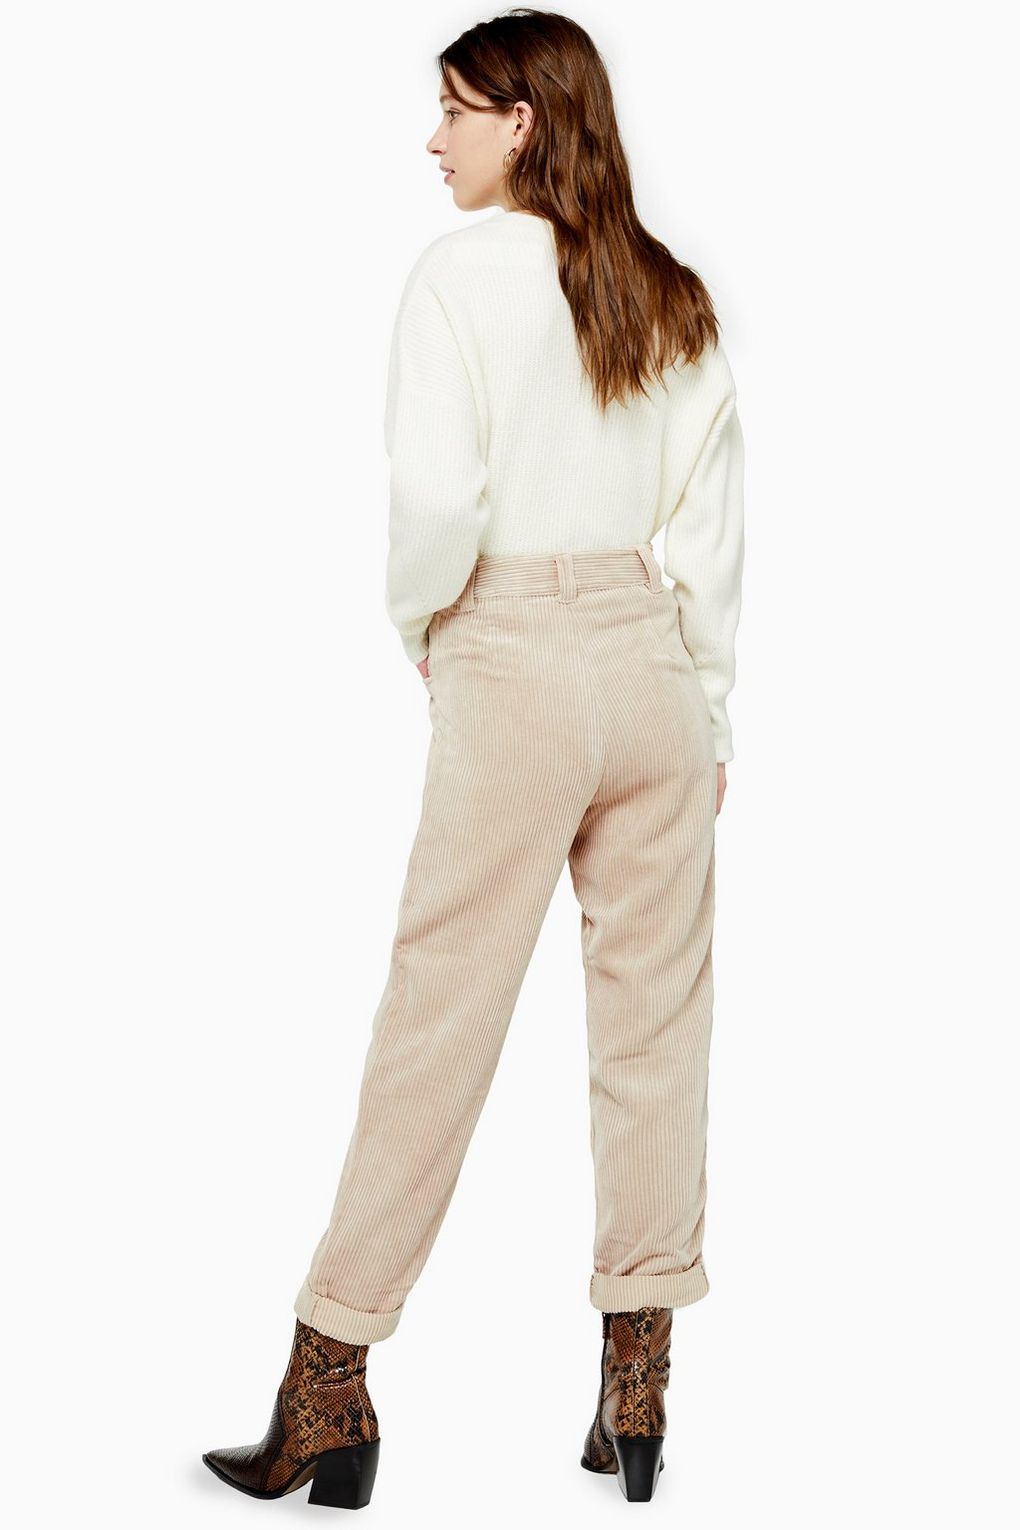 Topshop cord mom jeans in stone  ASOS